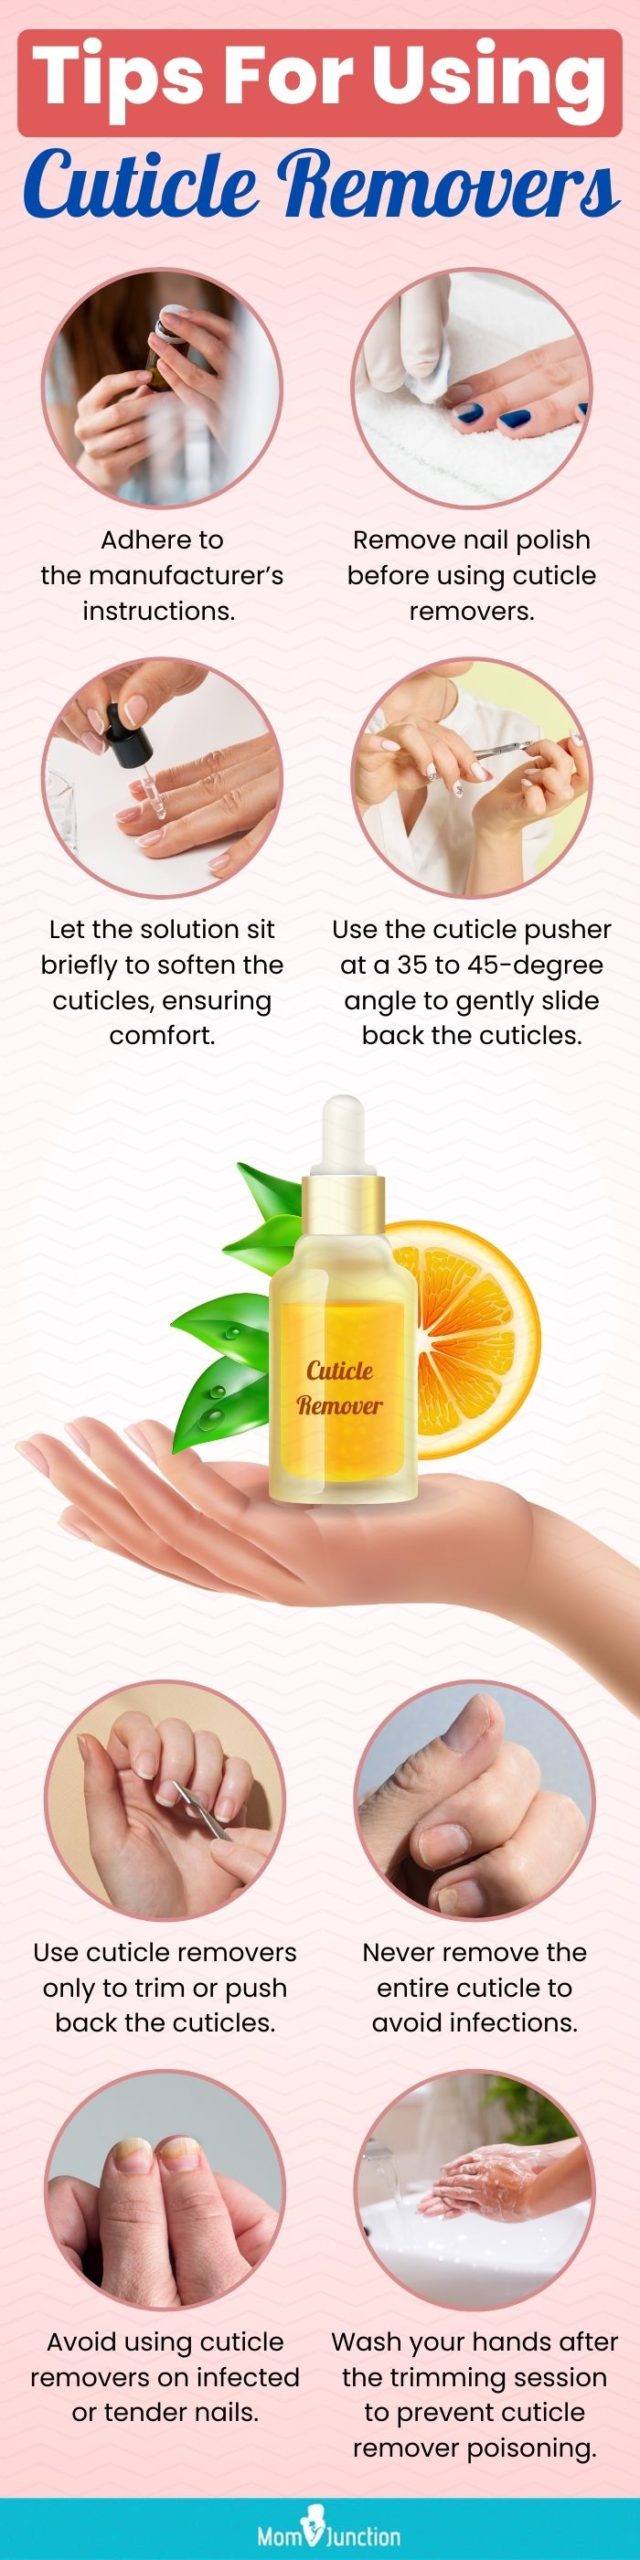 Tips For Using Cuticle Removers (infographic)